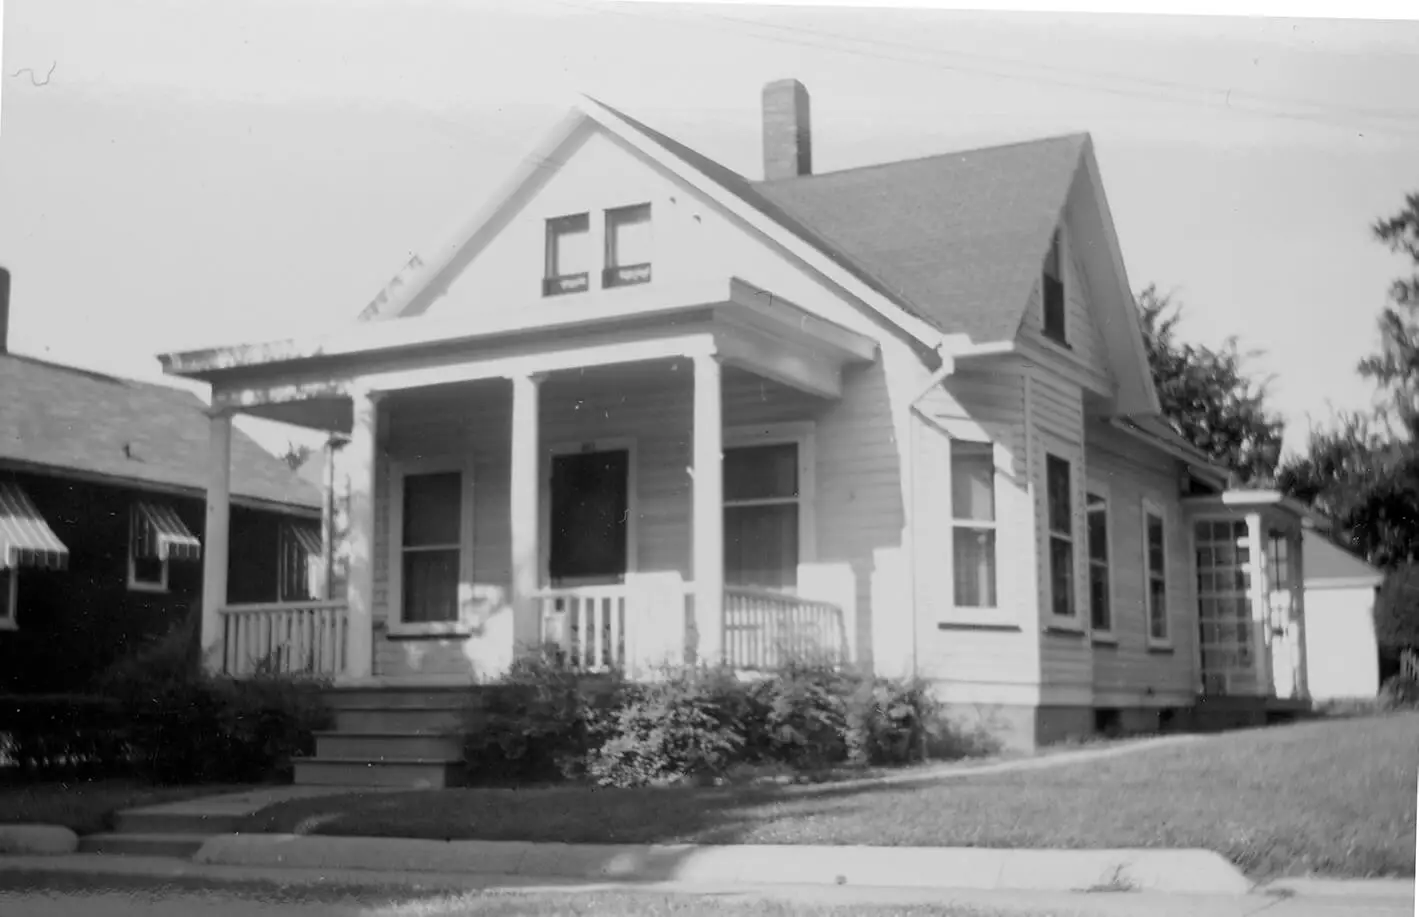 Black and white photo of a one-story home with front porch, white siding, and bushes in the front yard.